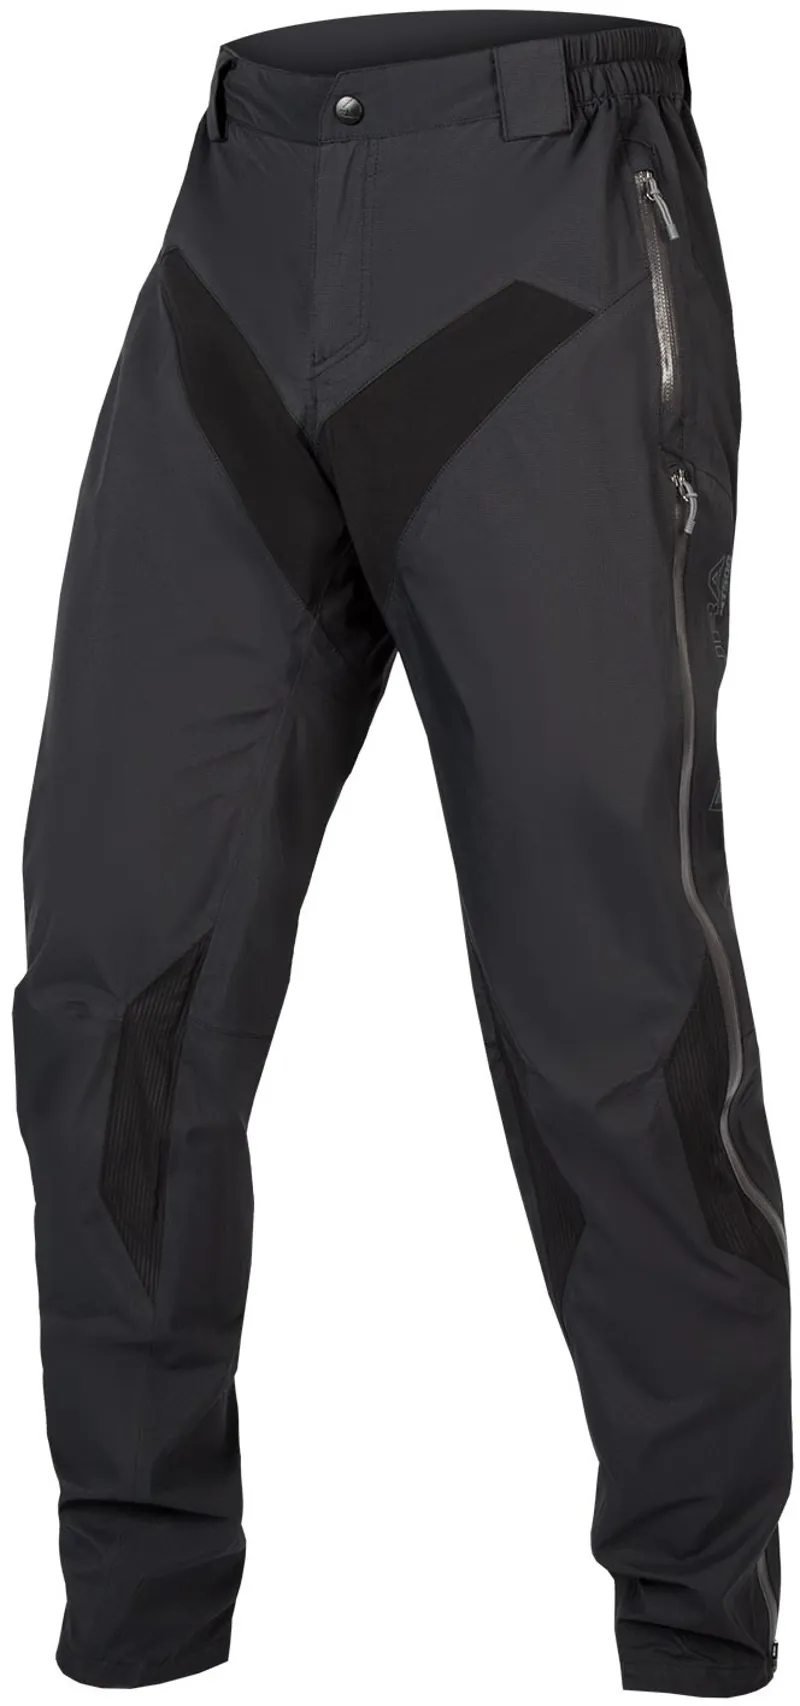 Endura launches new waterproof tights trousers and shorts